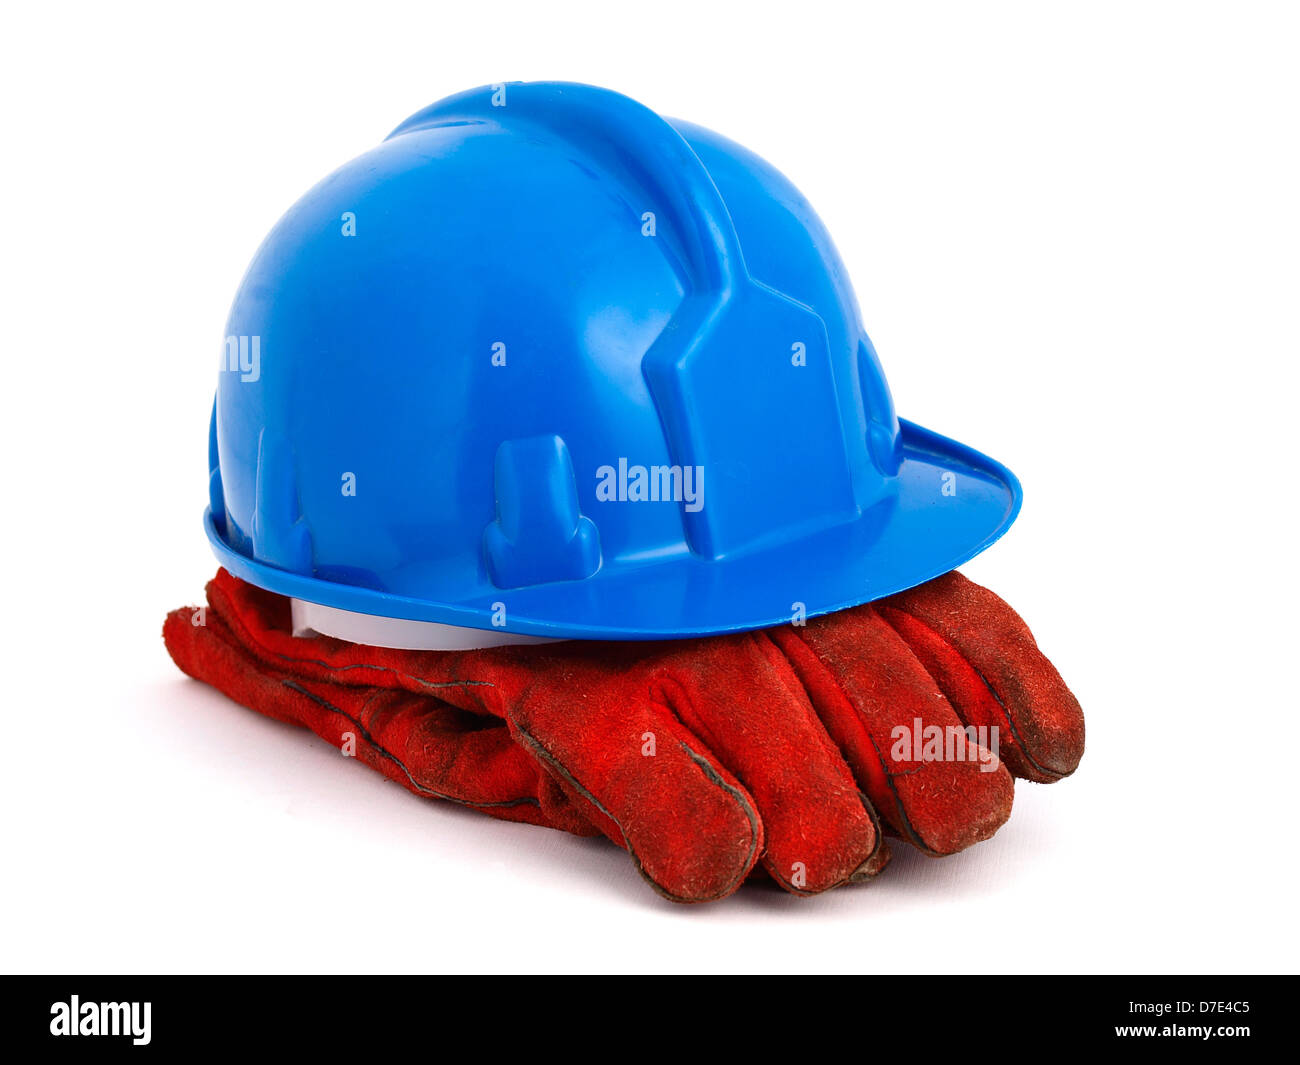 Safety helmet and gloves isolated on white background Stock Photo